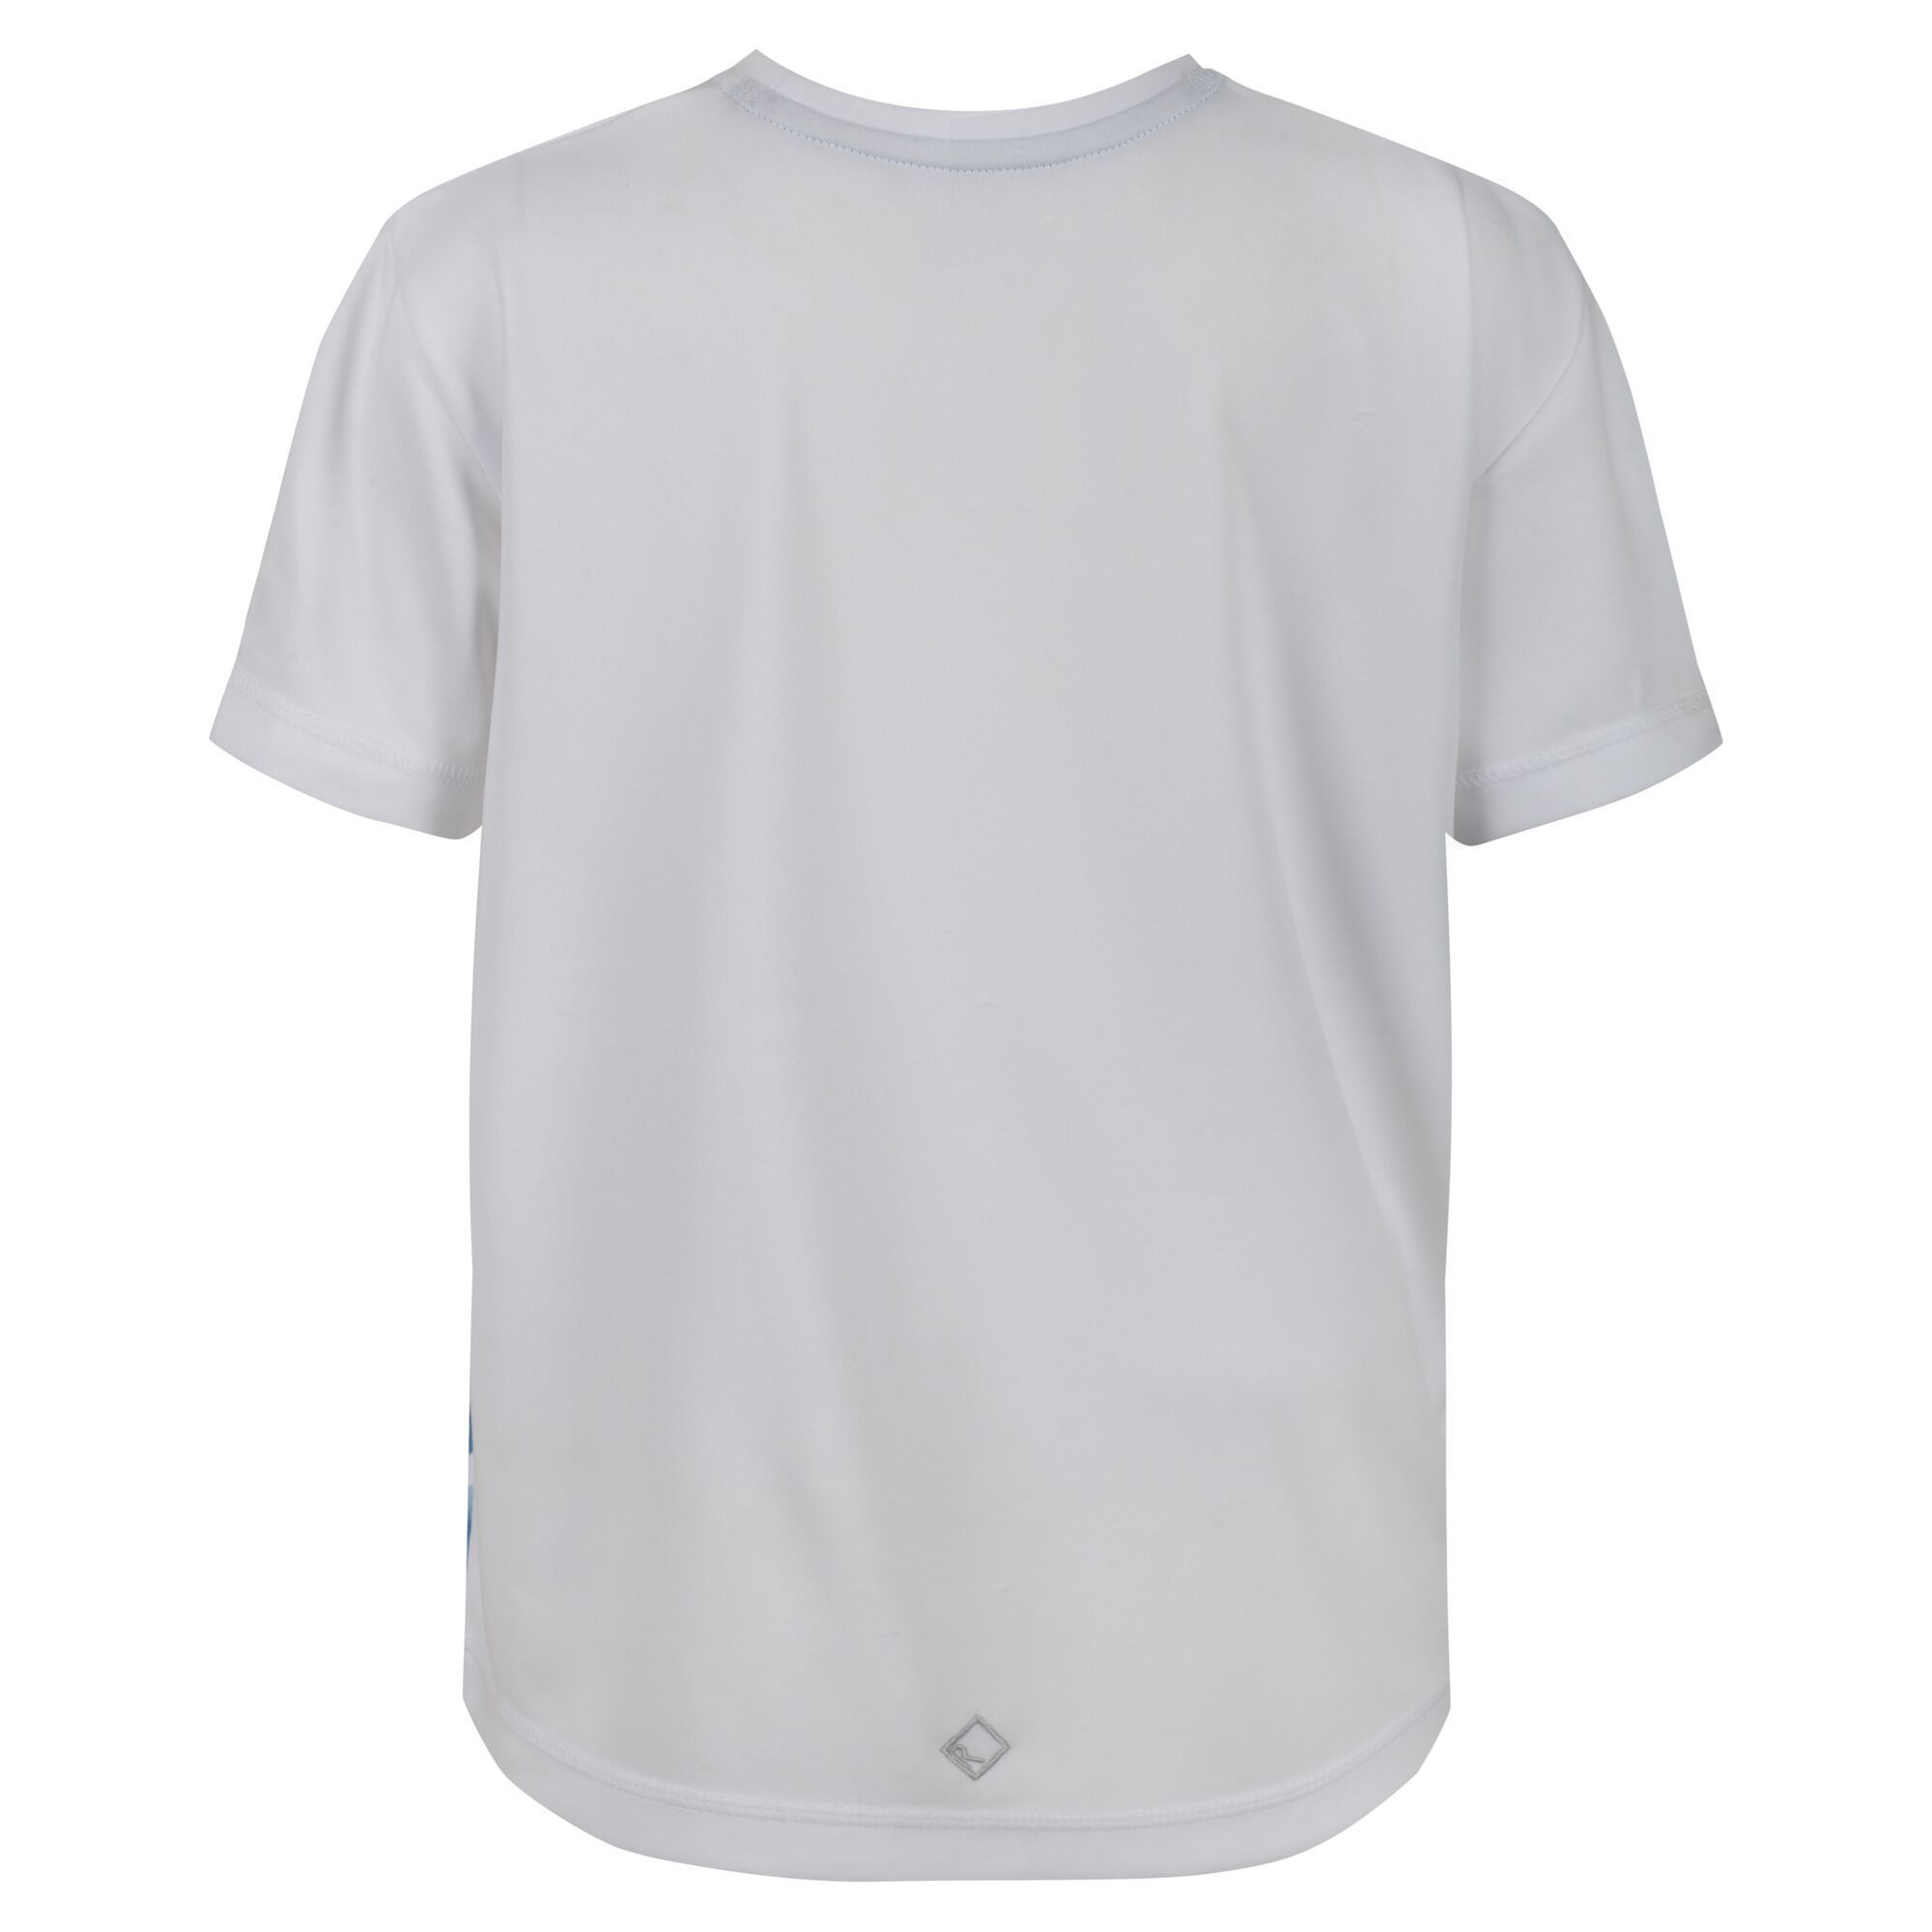 Material: 100% Polyester. Breathable and durable t shirt with moisture-wicking performance. Quick dry fabric. Features an adventure inspired graphic print on the chest and the Regatta logo on the left sleeve.